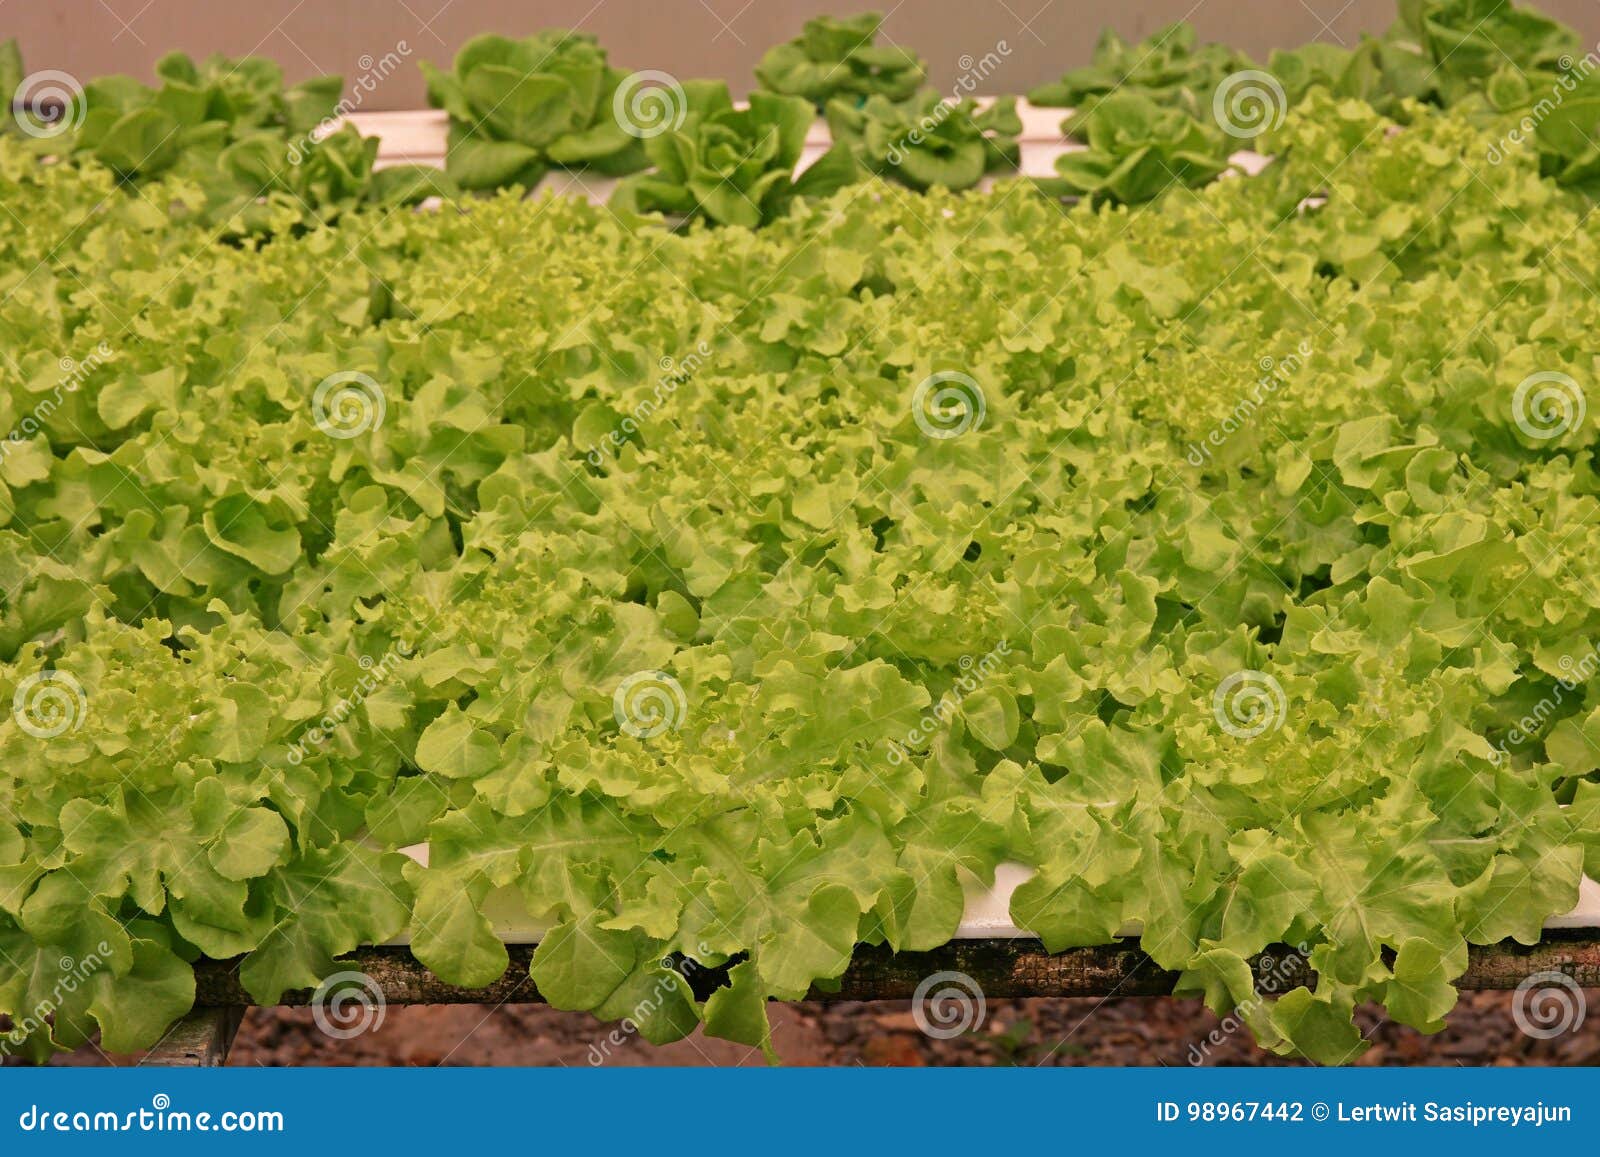 Hydroponic Vegetable Culture in Greenhouse Water Evaporation Stock